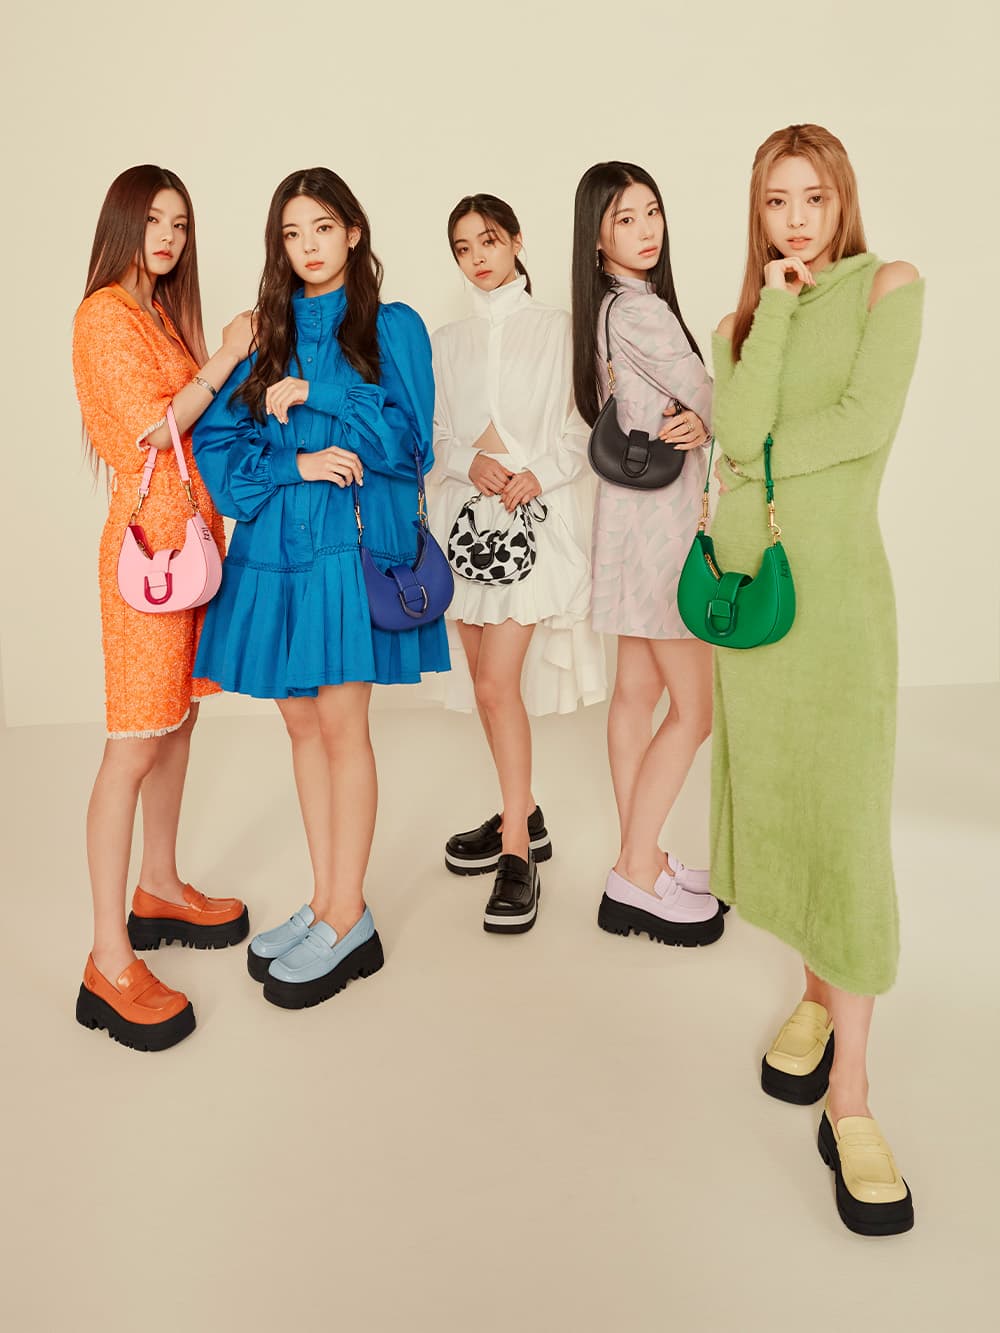 ITZY collaborate with fashion label CHARLES & KEITH to release vibrant  collaboration capsule